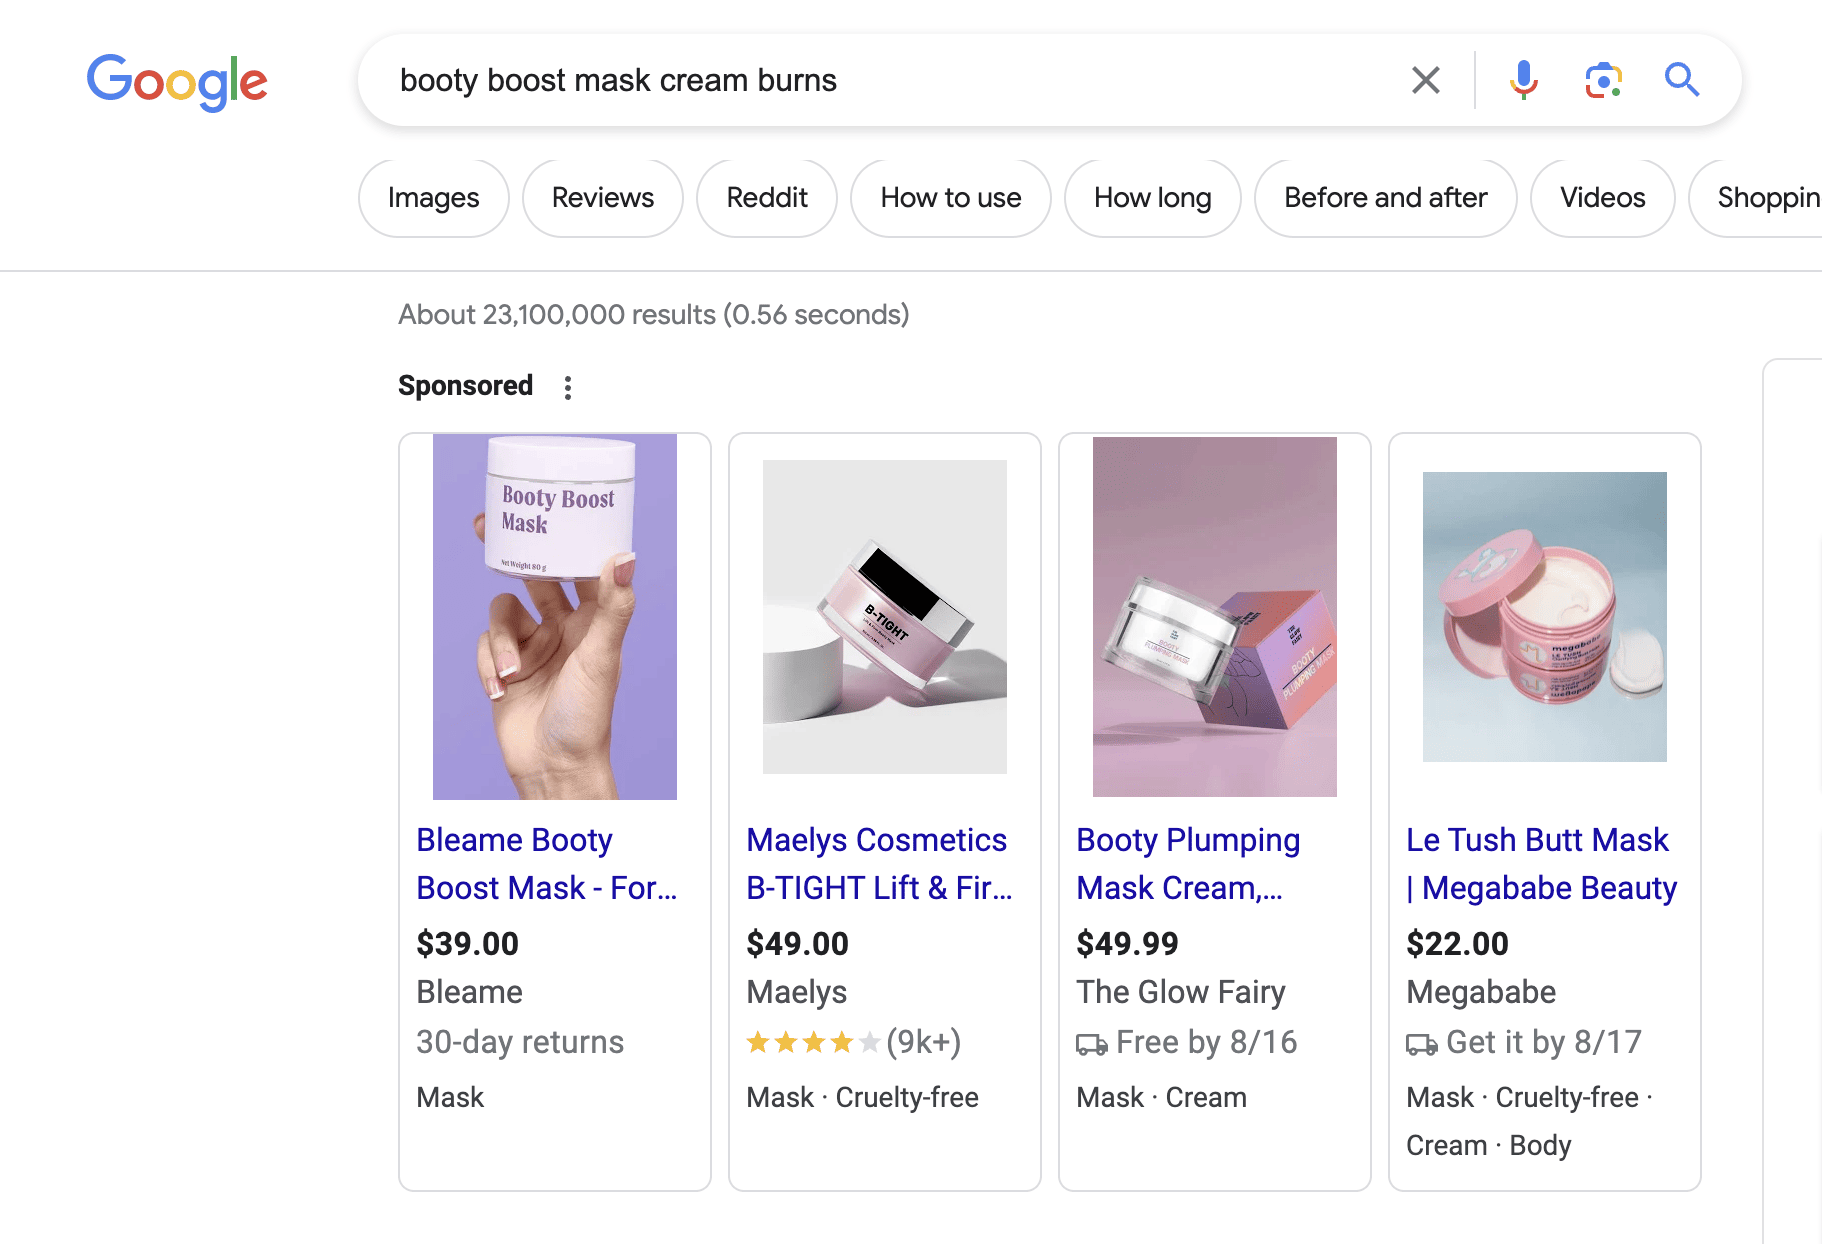 Google adwords ad for for Bleame booty boost mask that lists 30-day returns. 